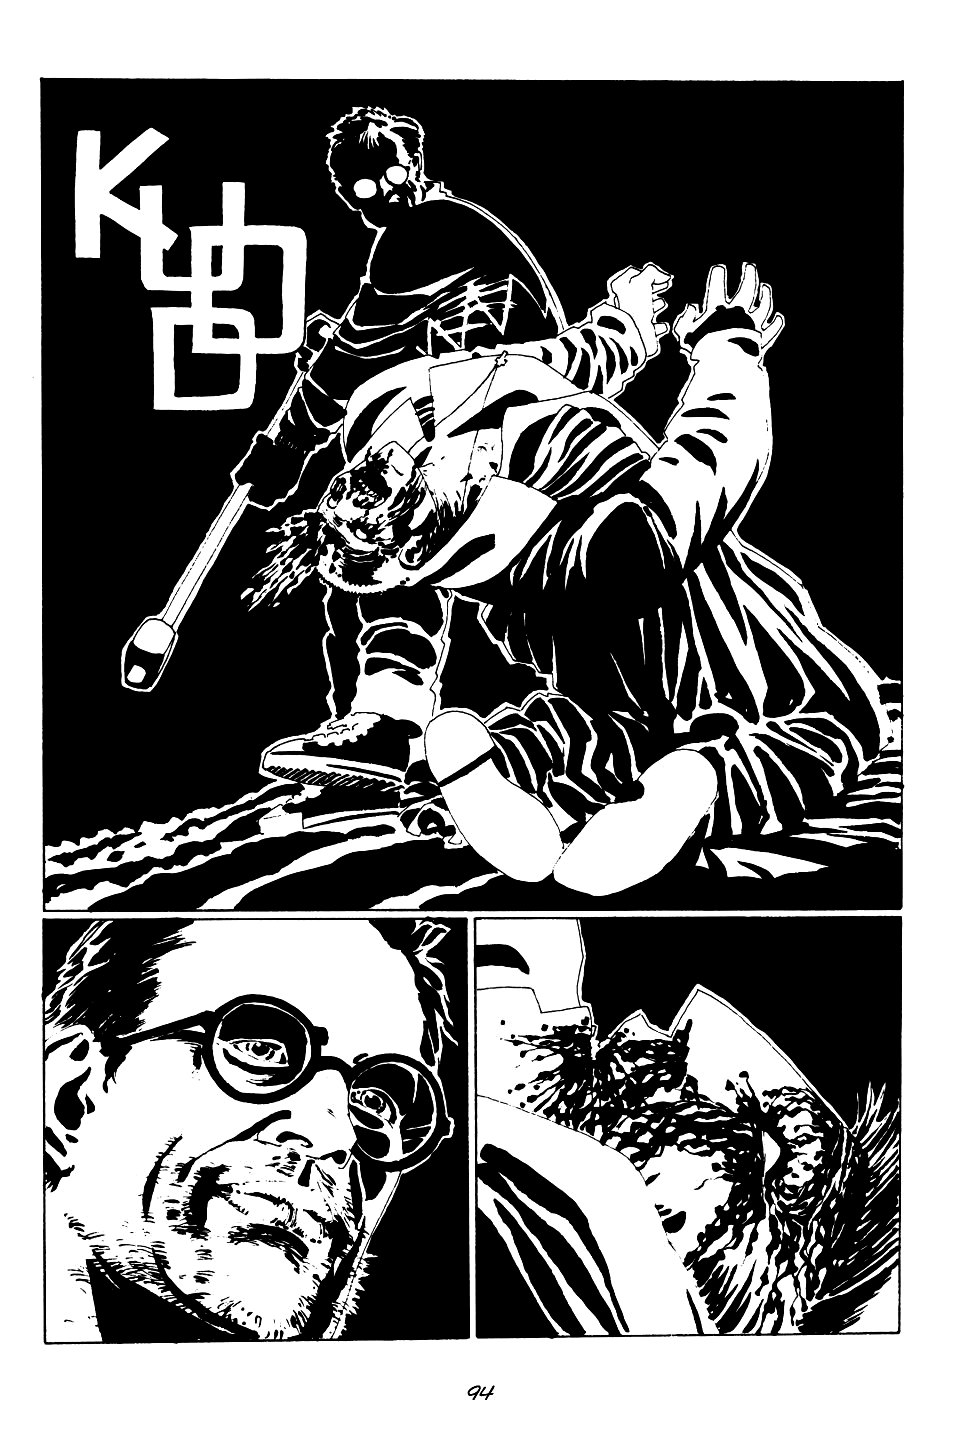 page 94 of sin city 1 the hard goodbye